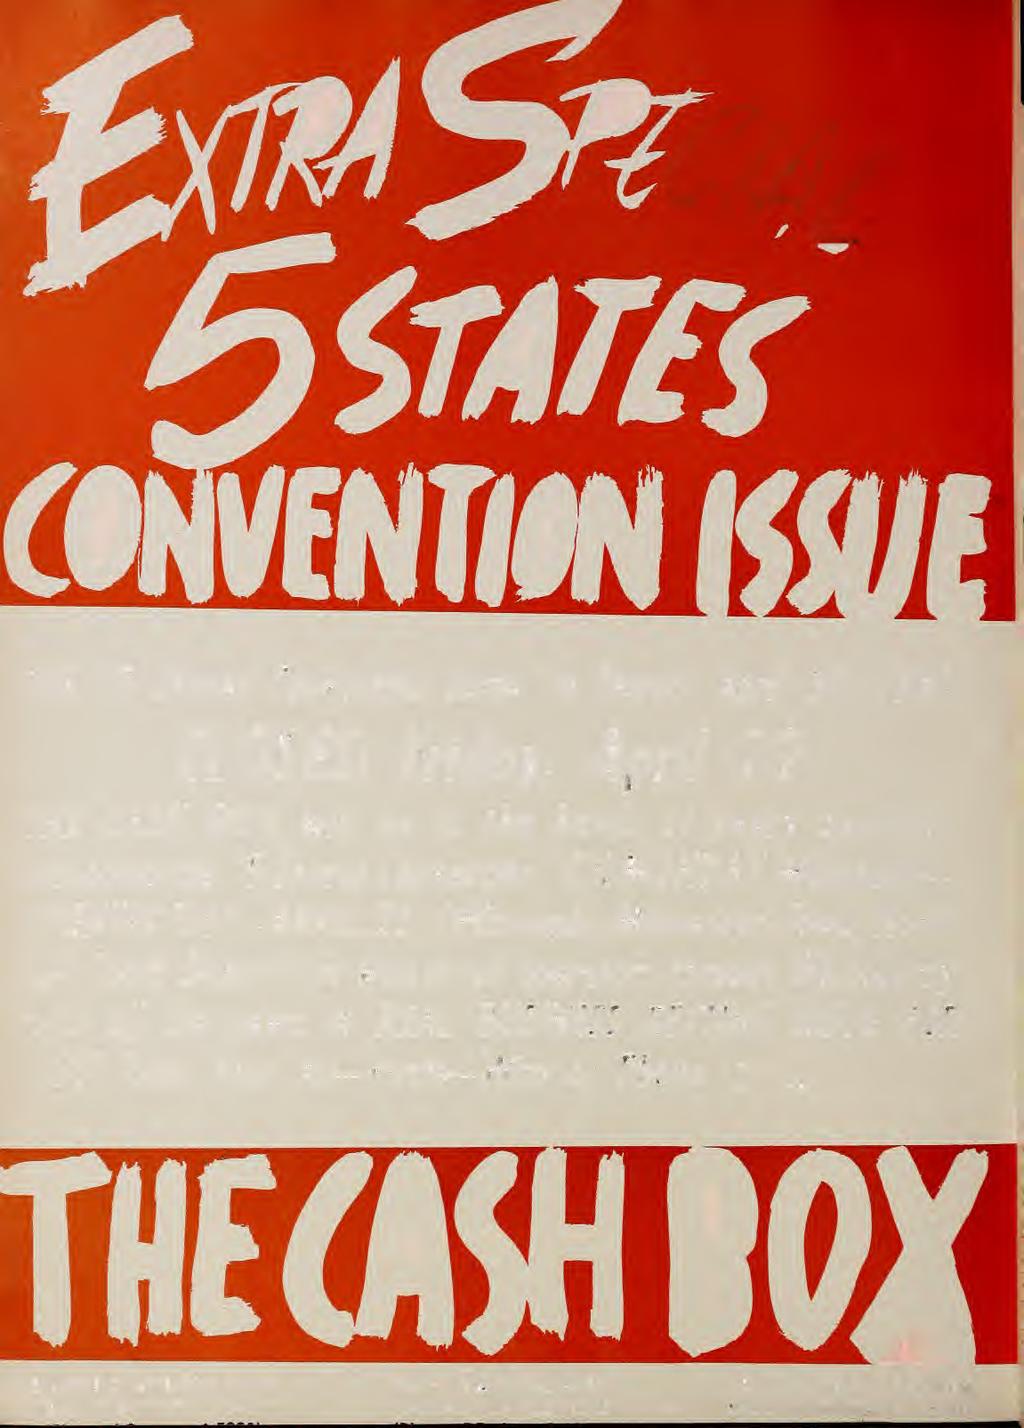 The "5 States Convention ssue" is Dated: Aprii 30, 1949 CLOSES: Friday, April 22